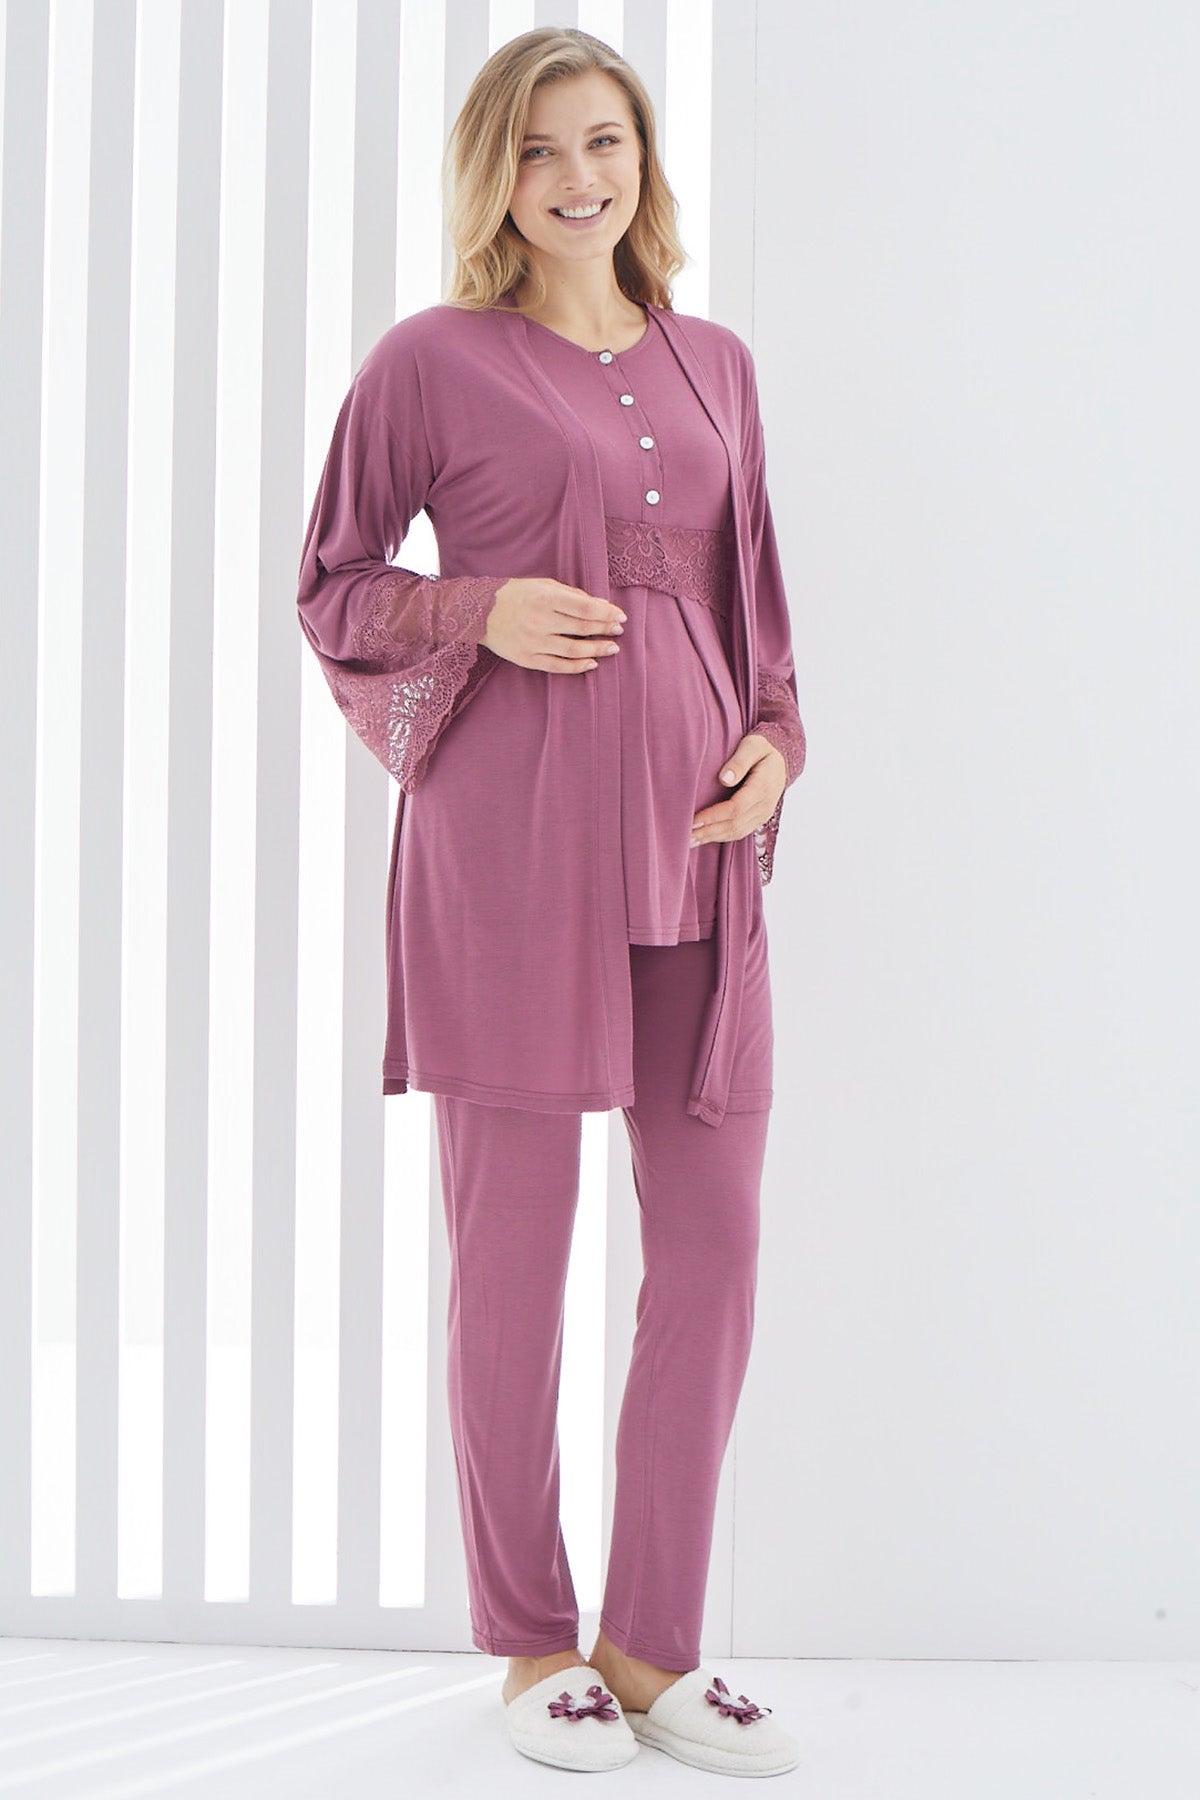 Shopymommy 3412 Lace 3-Pieces Maternity & Nursing Pajamas With Lace Flywheel Arm Robe Plum